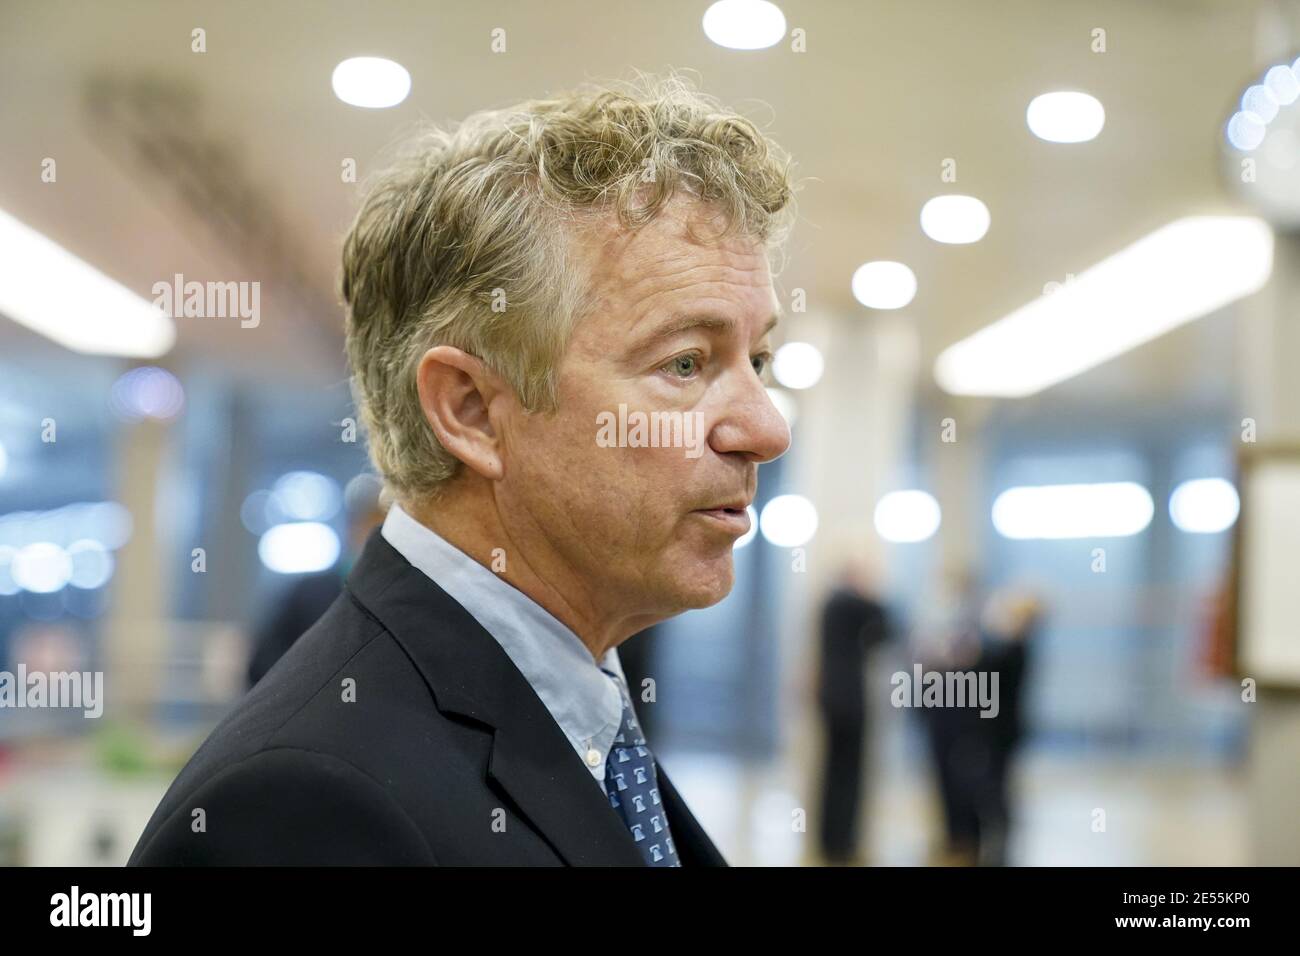 Washington, United States. 26th Jan, 2021. Sen. Rand Paul (R-KY) speaks to members of the media at the U.S. Capitol in Washington, DC on Wednesday, January 26, 2021. Senator Paul maintains his stance that the 2020 election lacked integrity. Photo by Leigh Vogel/UPI Credit: UPI/Alamy Live News Stock Photo